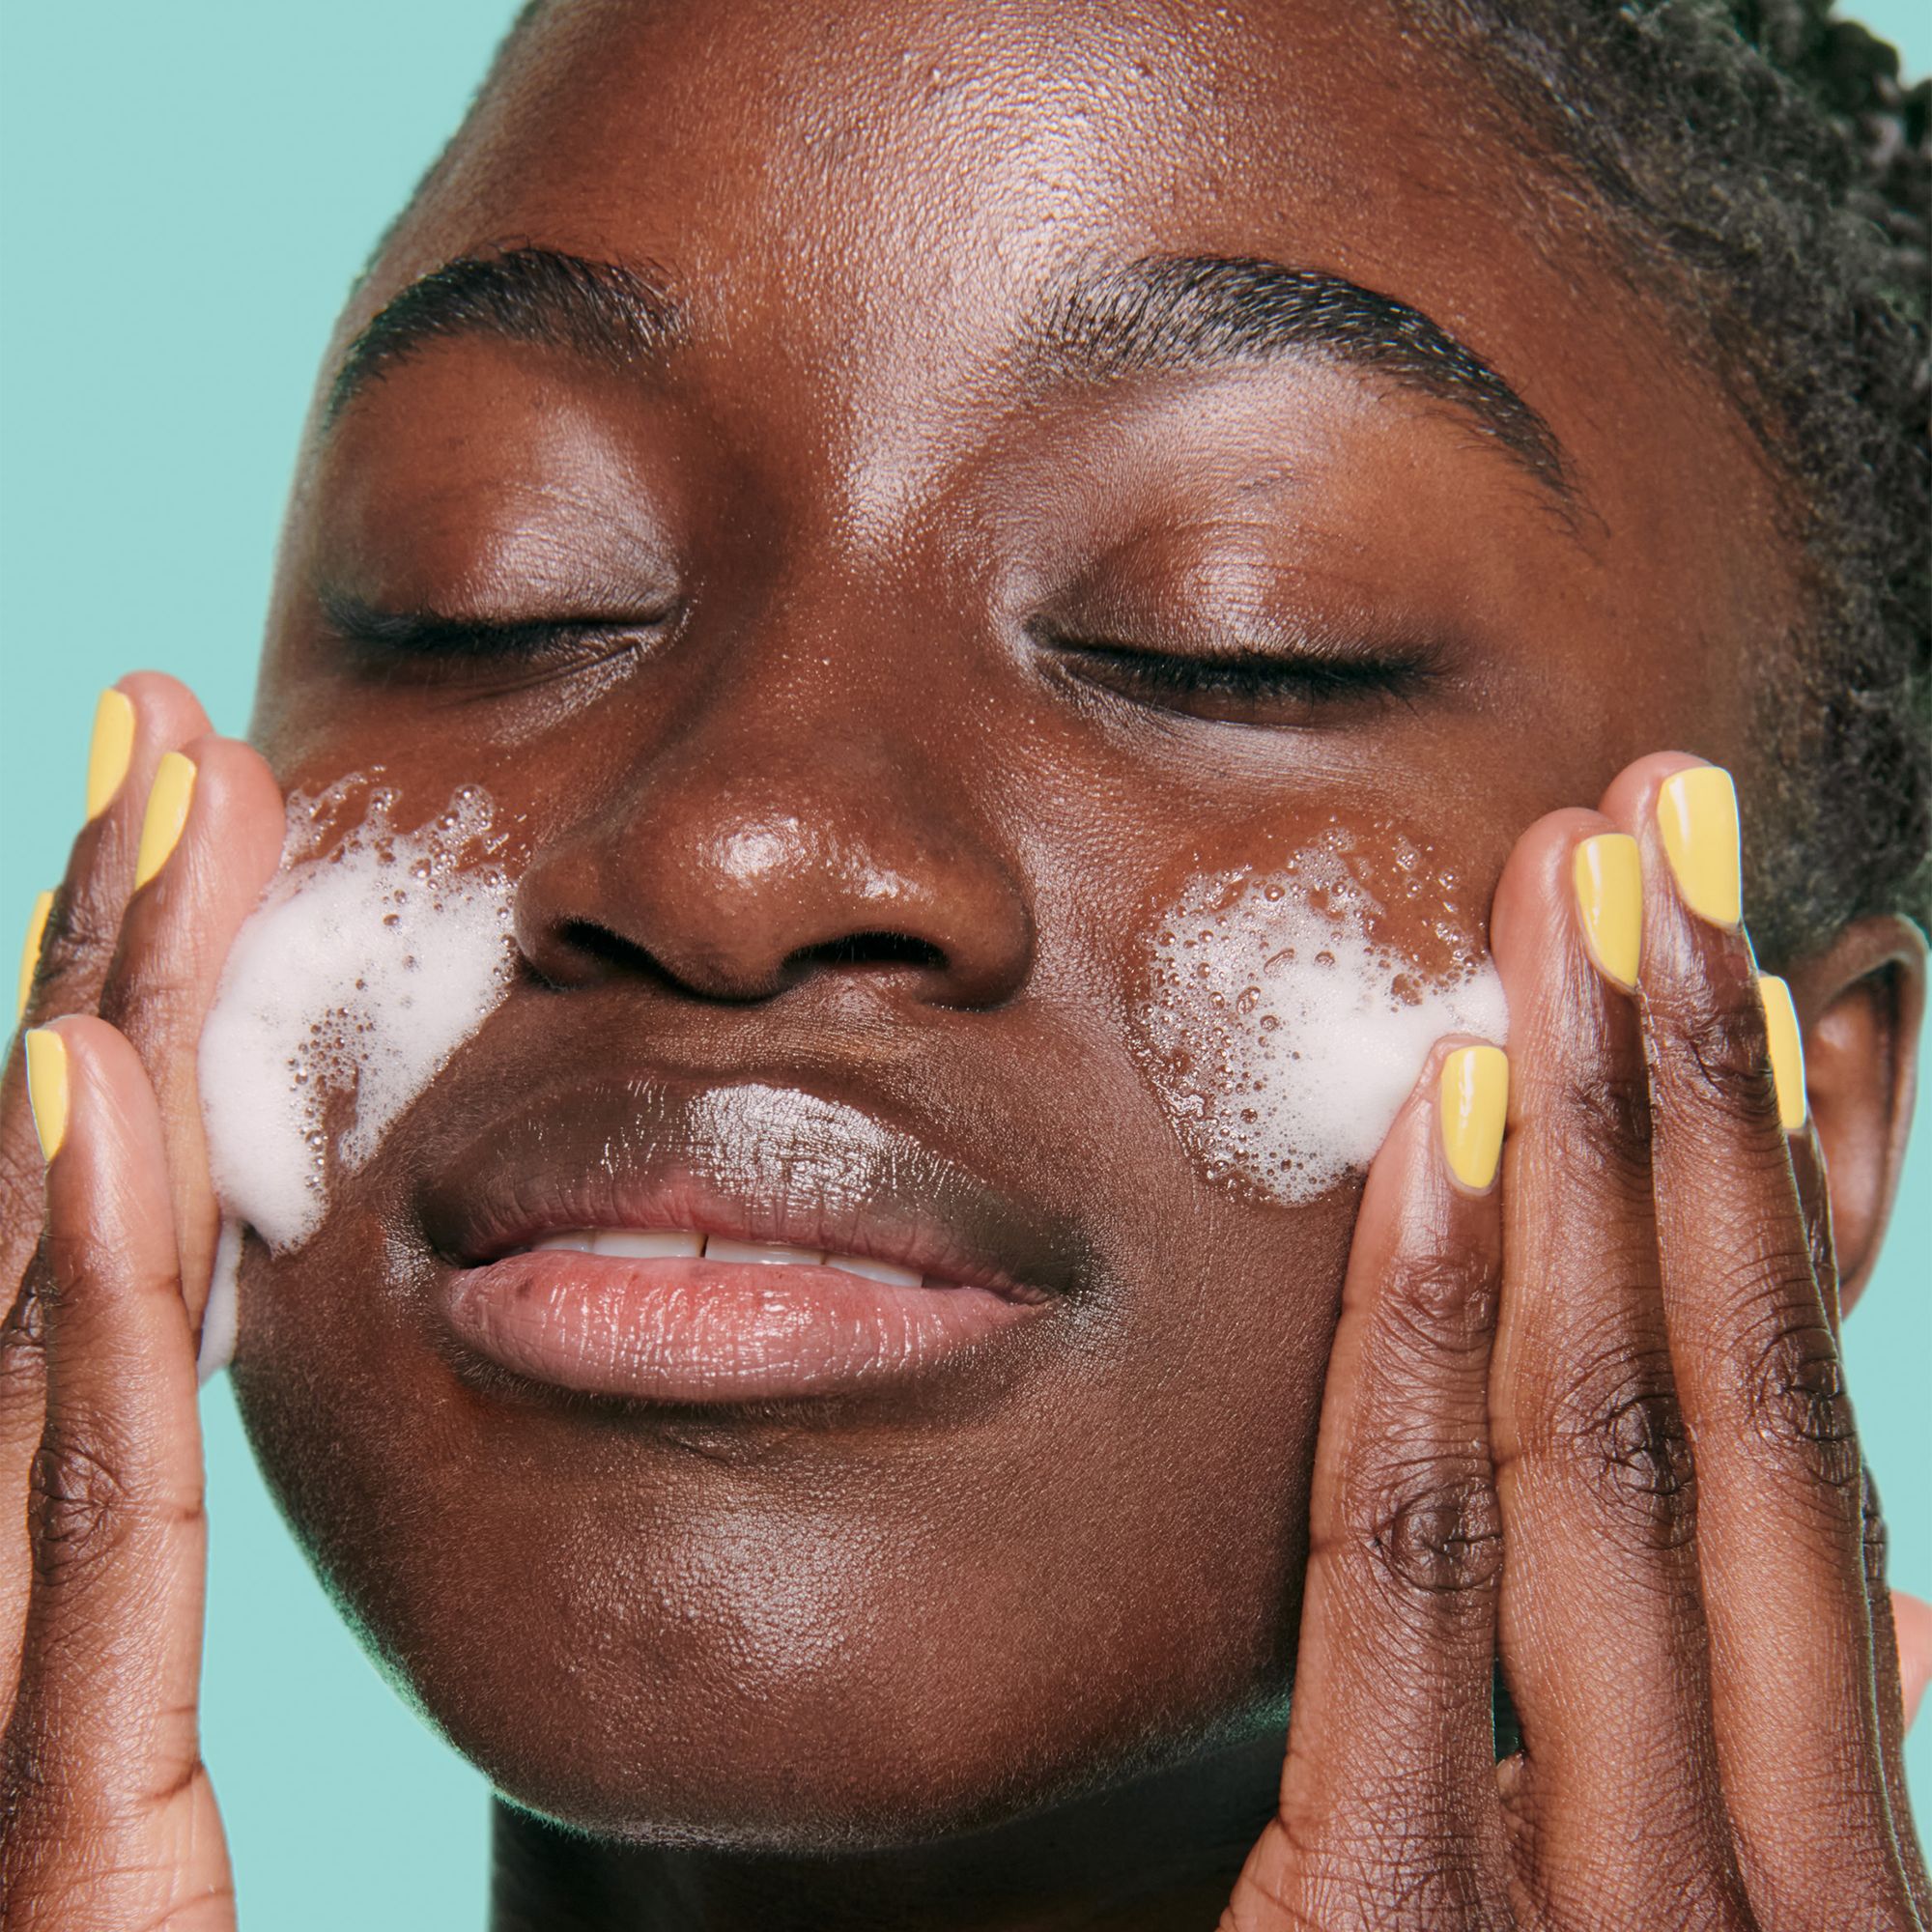 Benefit Makes Pore Care Skin Care – Exclusive Details, Where to